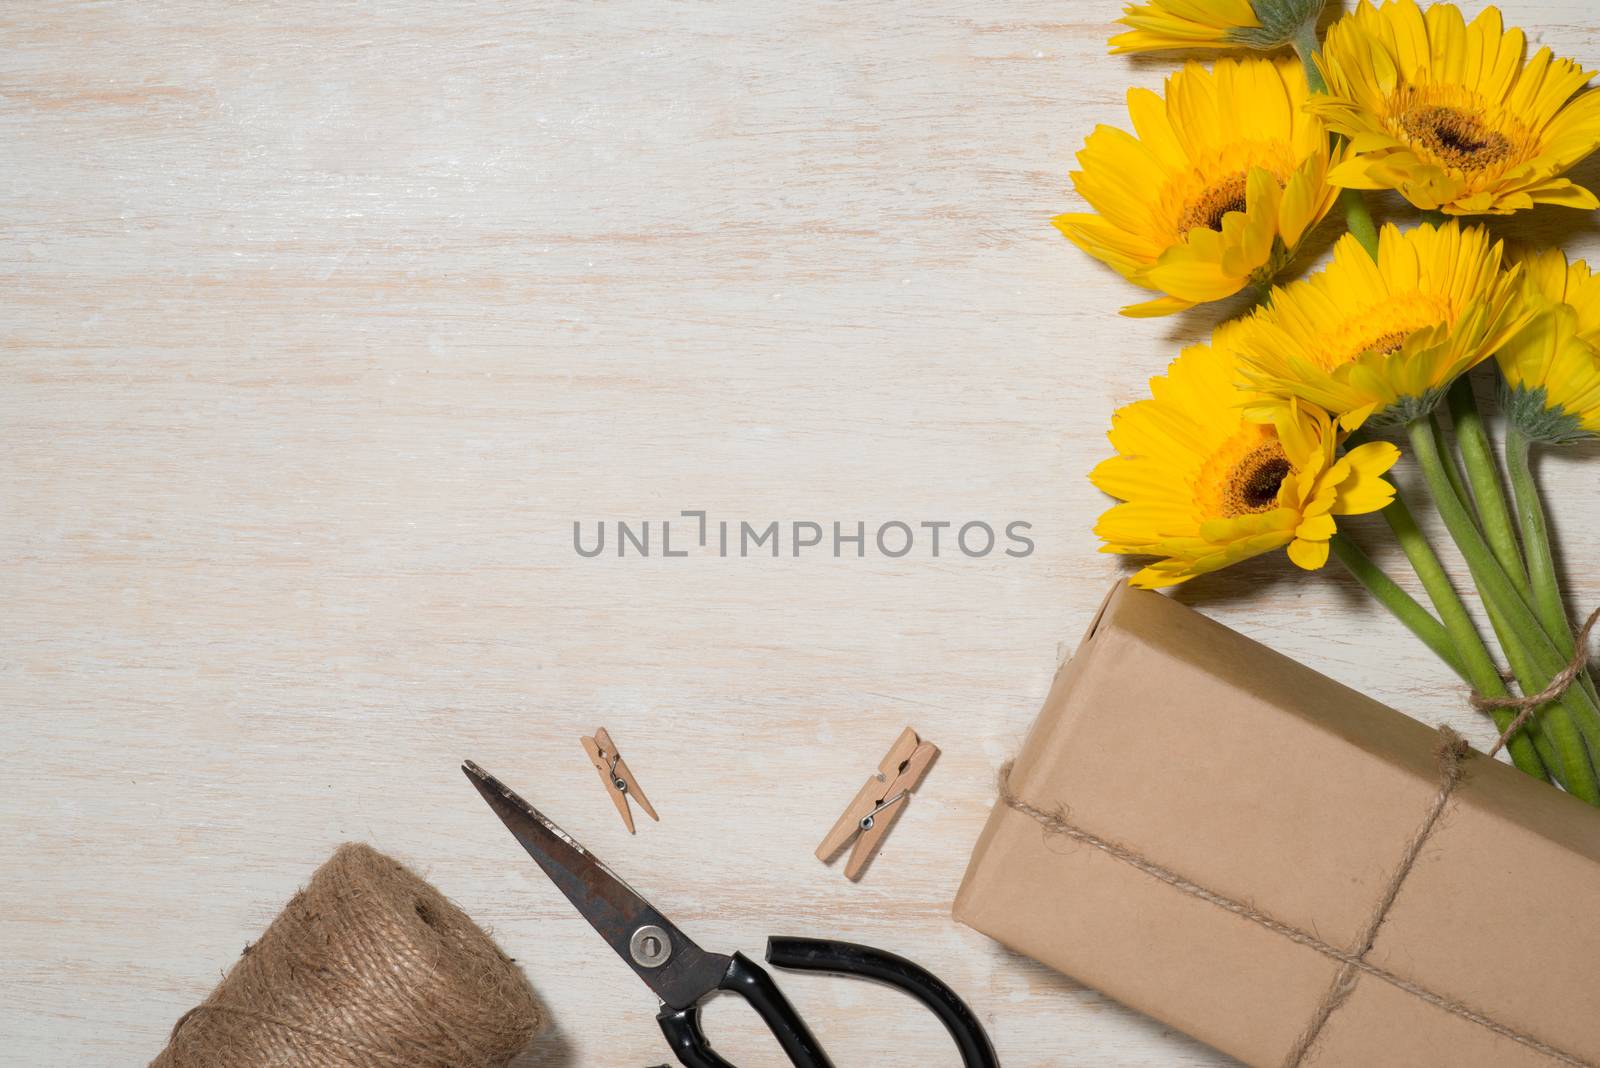 Wrapping flowers gift over wooden background. Top view with copy space